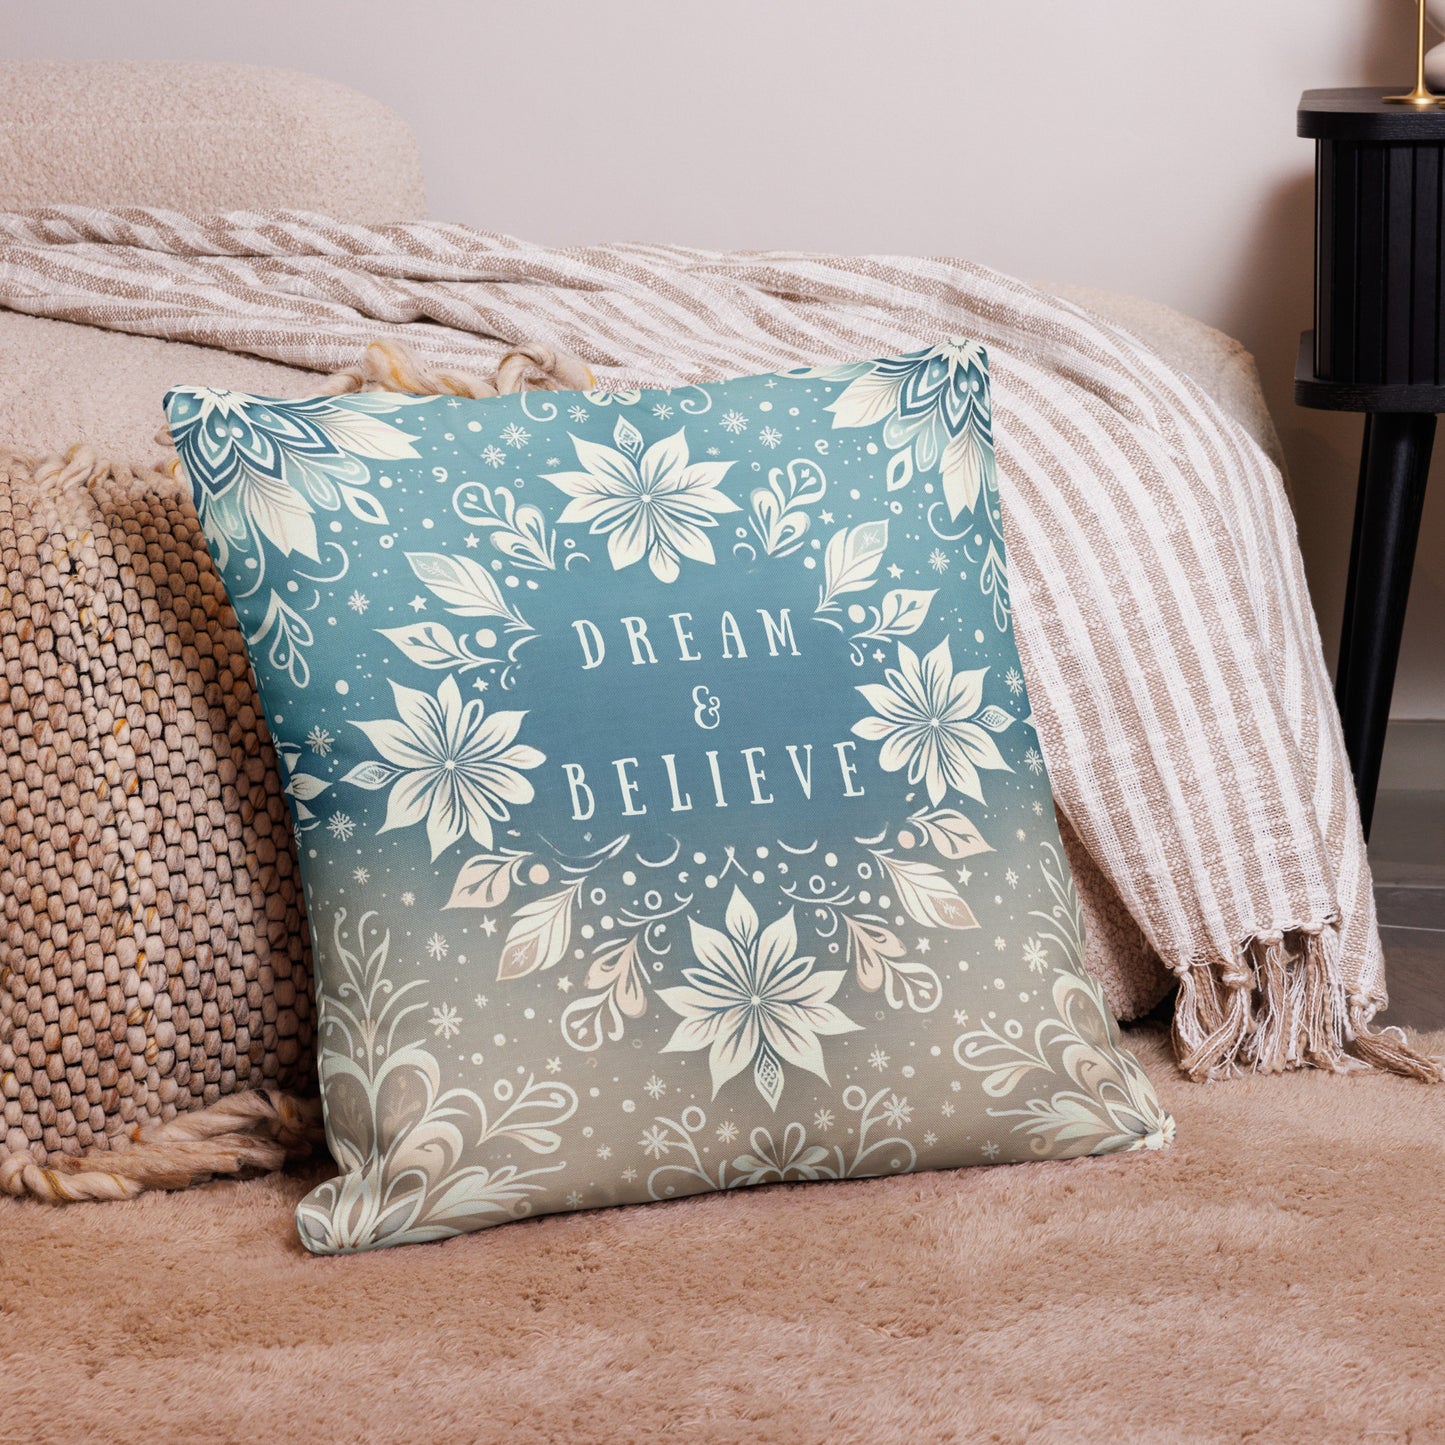 Double-Sided Inspirational Pillow Case - 'Never Give Up & Grateful' and 'Dream & Believe' Designs - 18x18 & 22x22